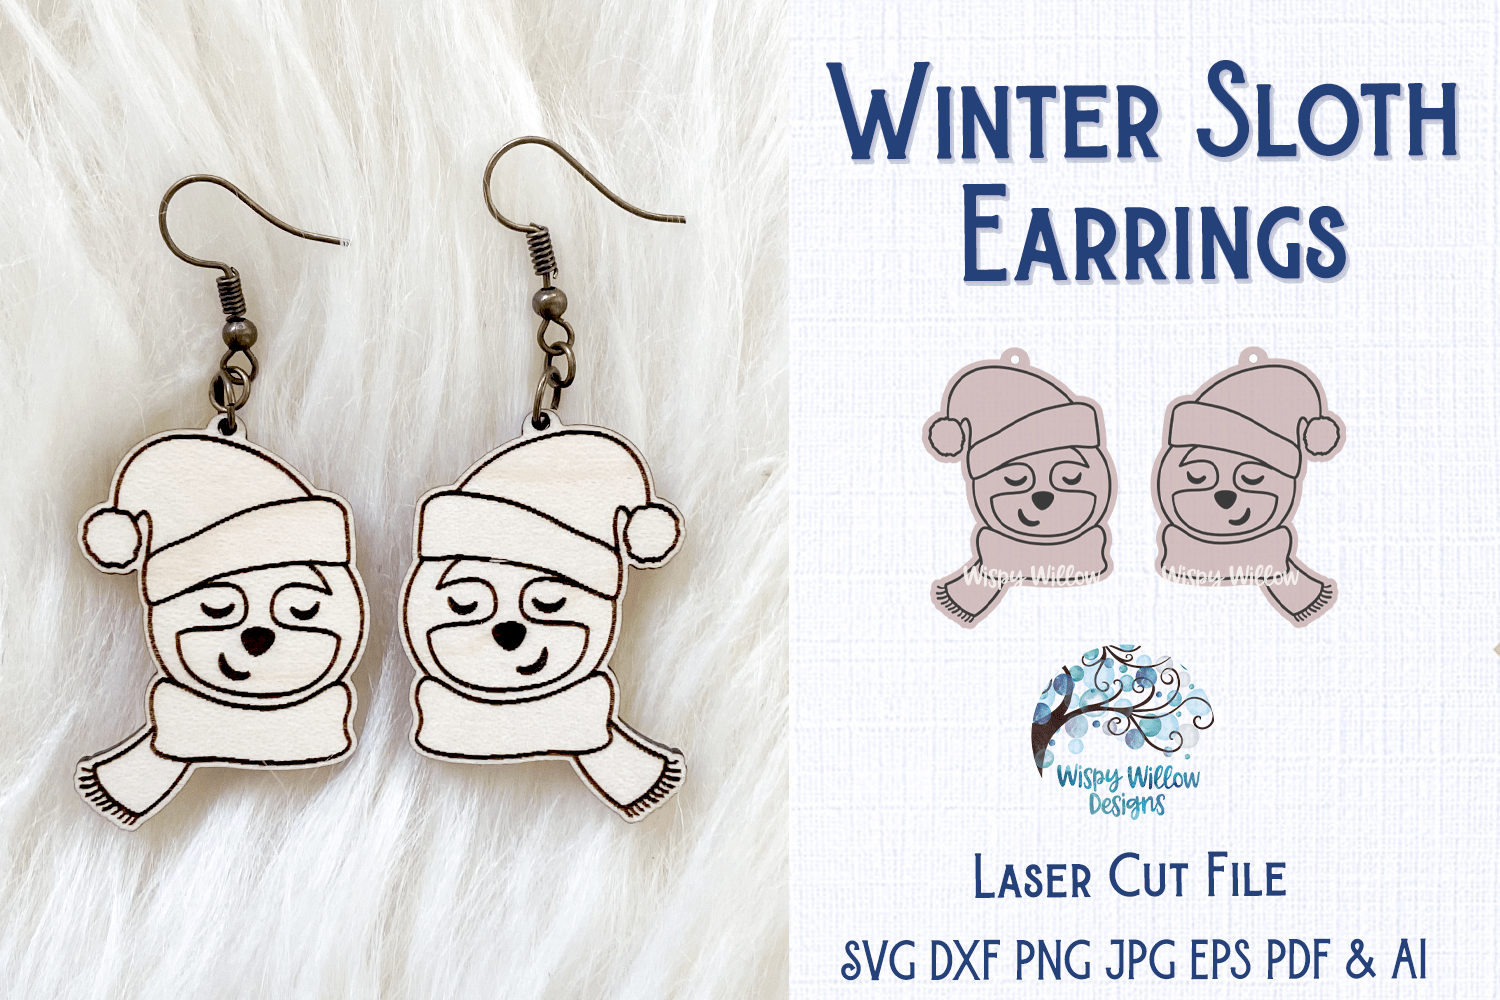 Winter Sloth Earrings for Glowforge or Laser Cutter Wispy Willow Designs Company